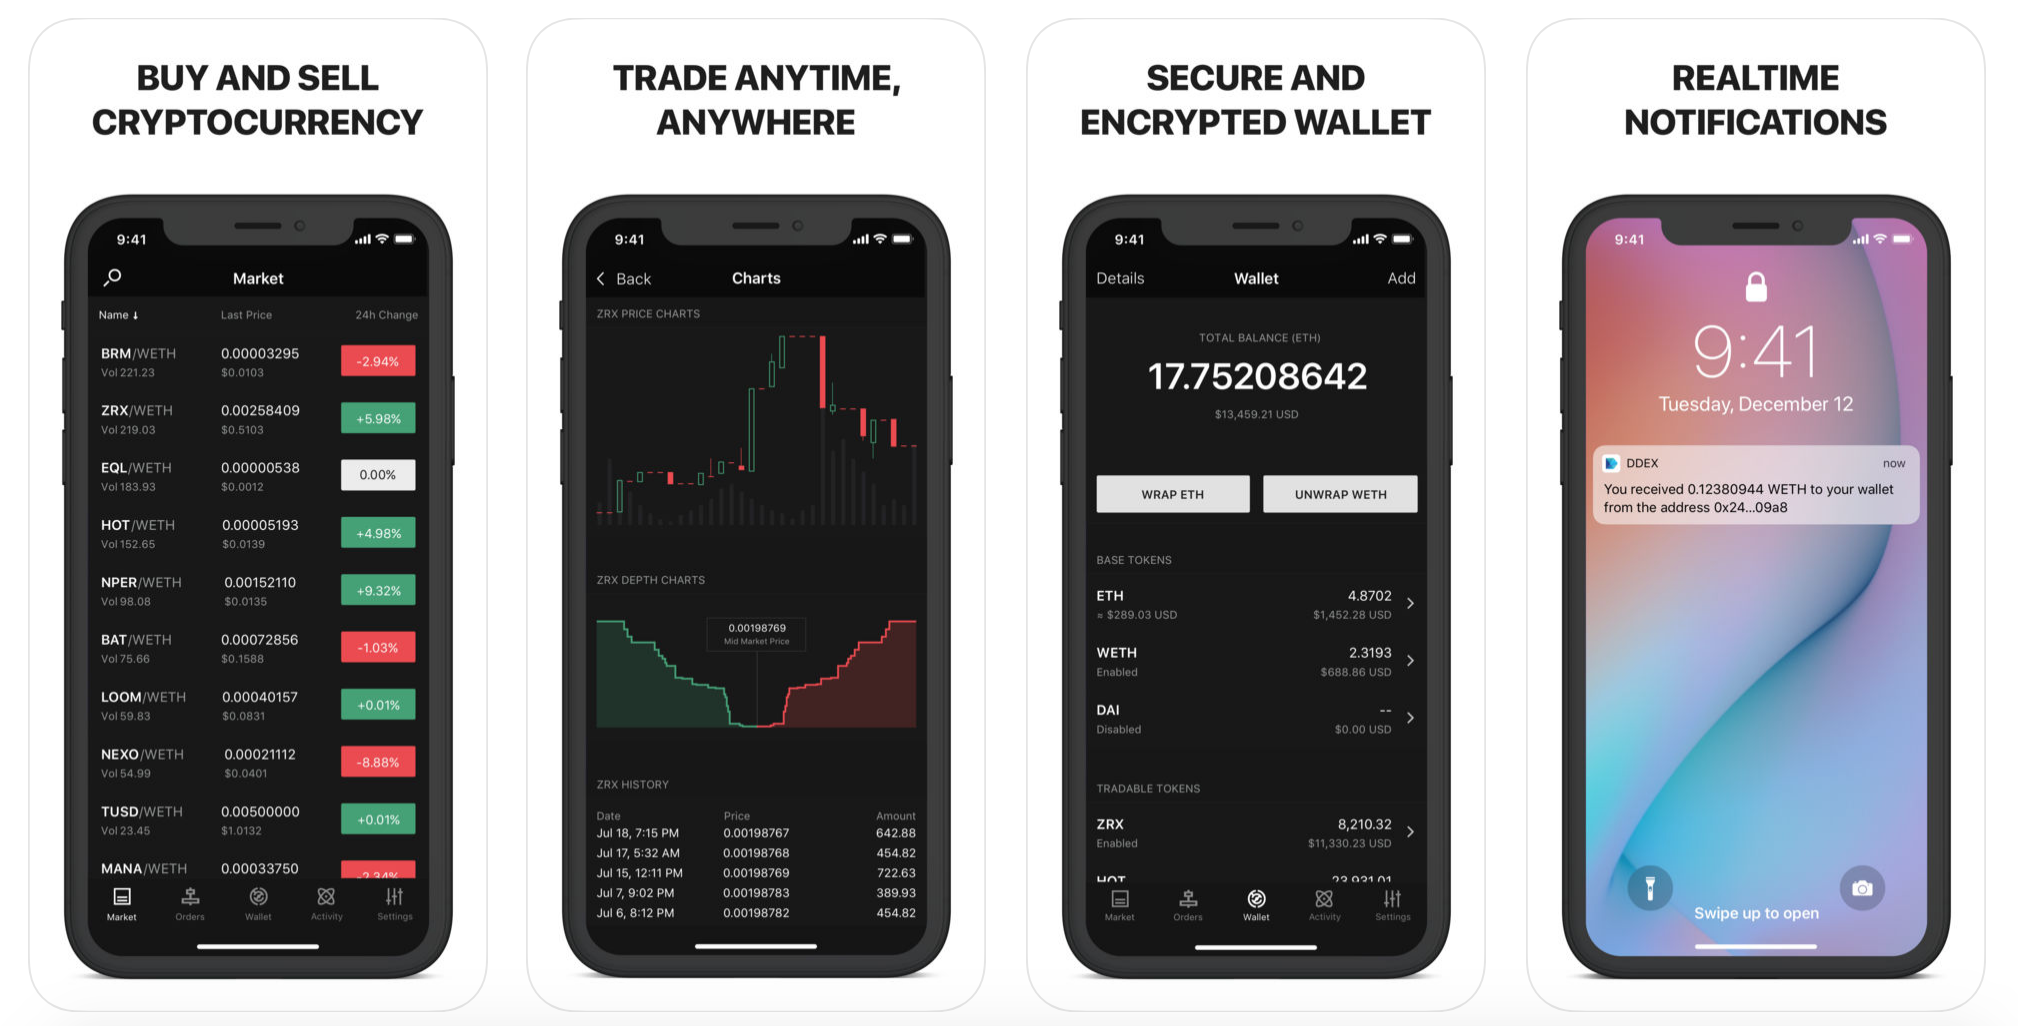 sifference between mobile trading apps